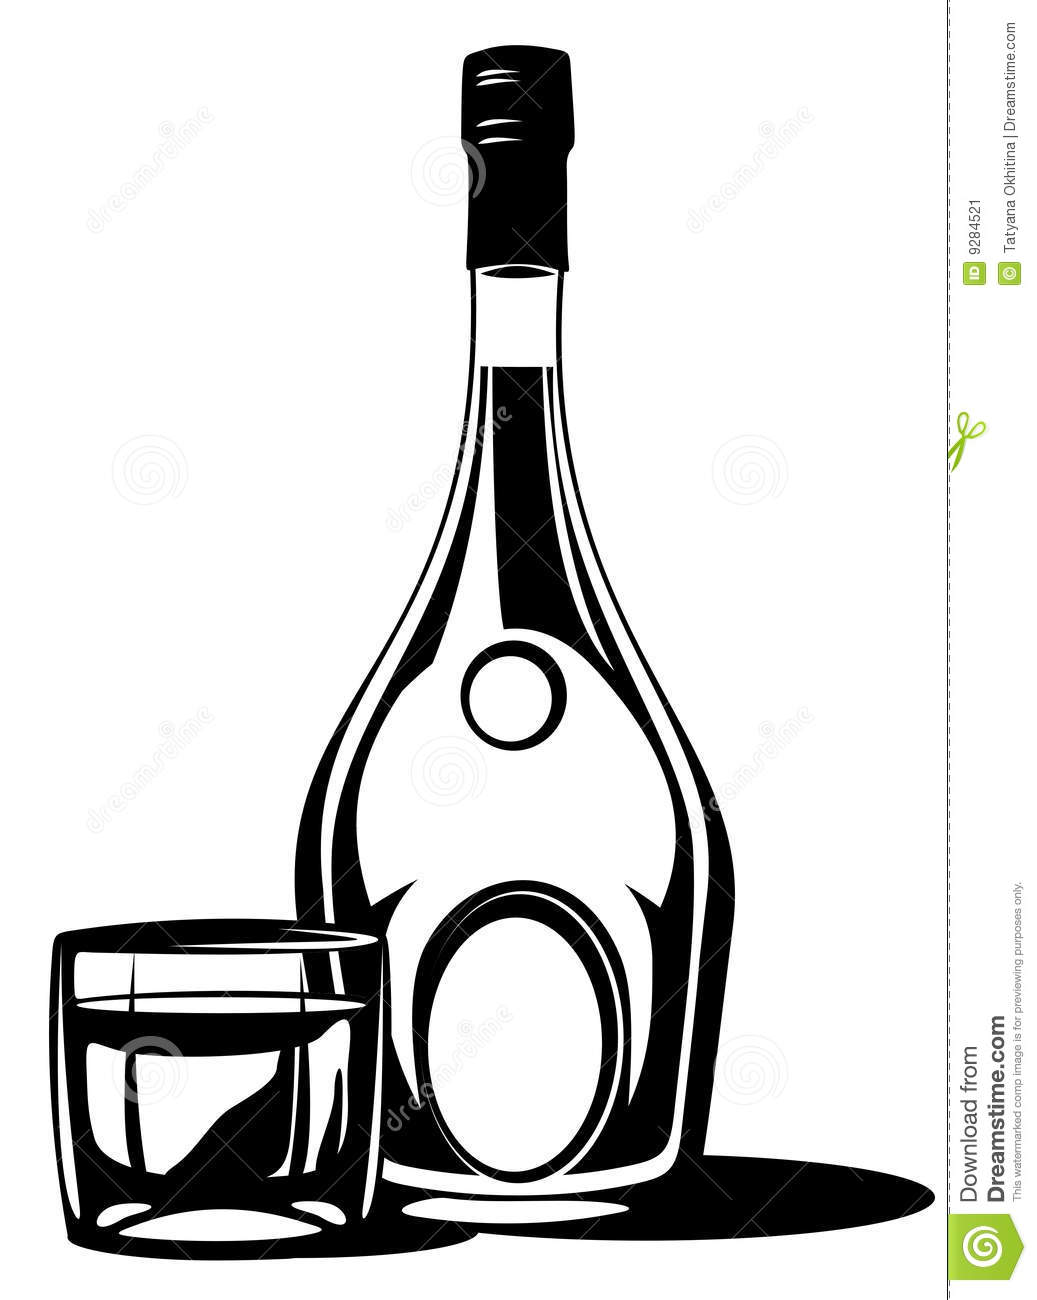 Whiskey Bottle And Glass Isolated On A White Background